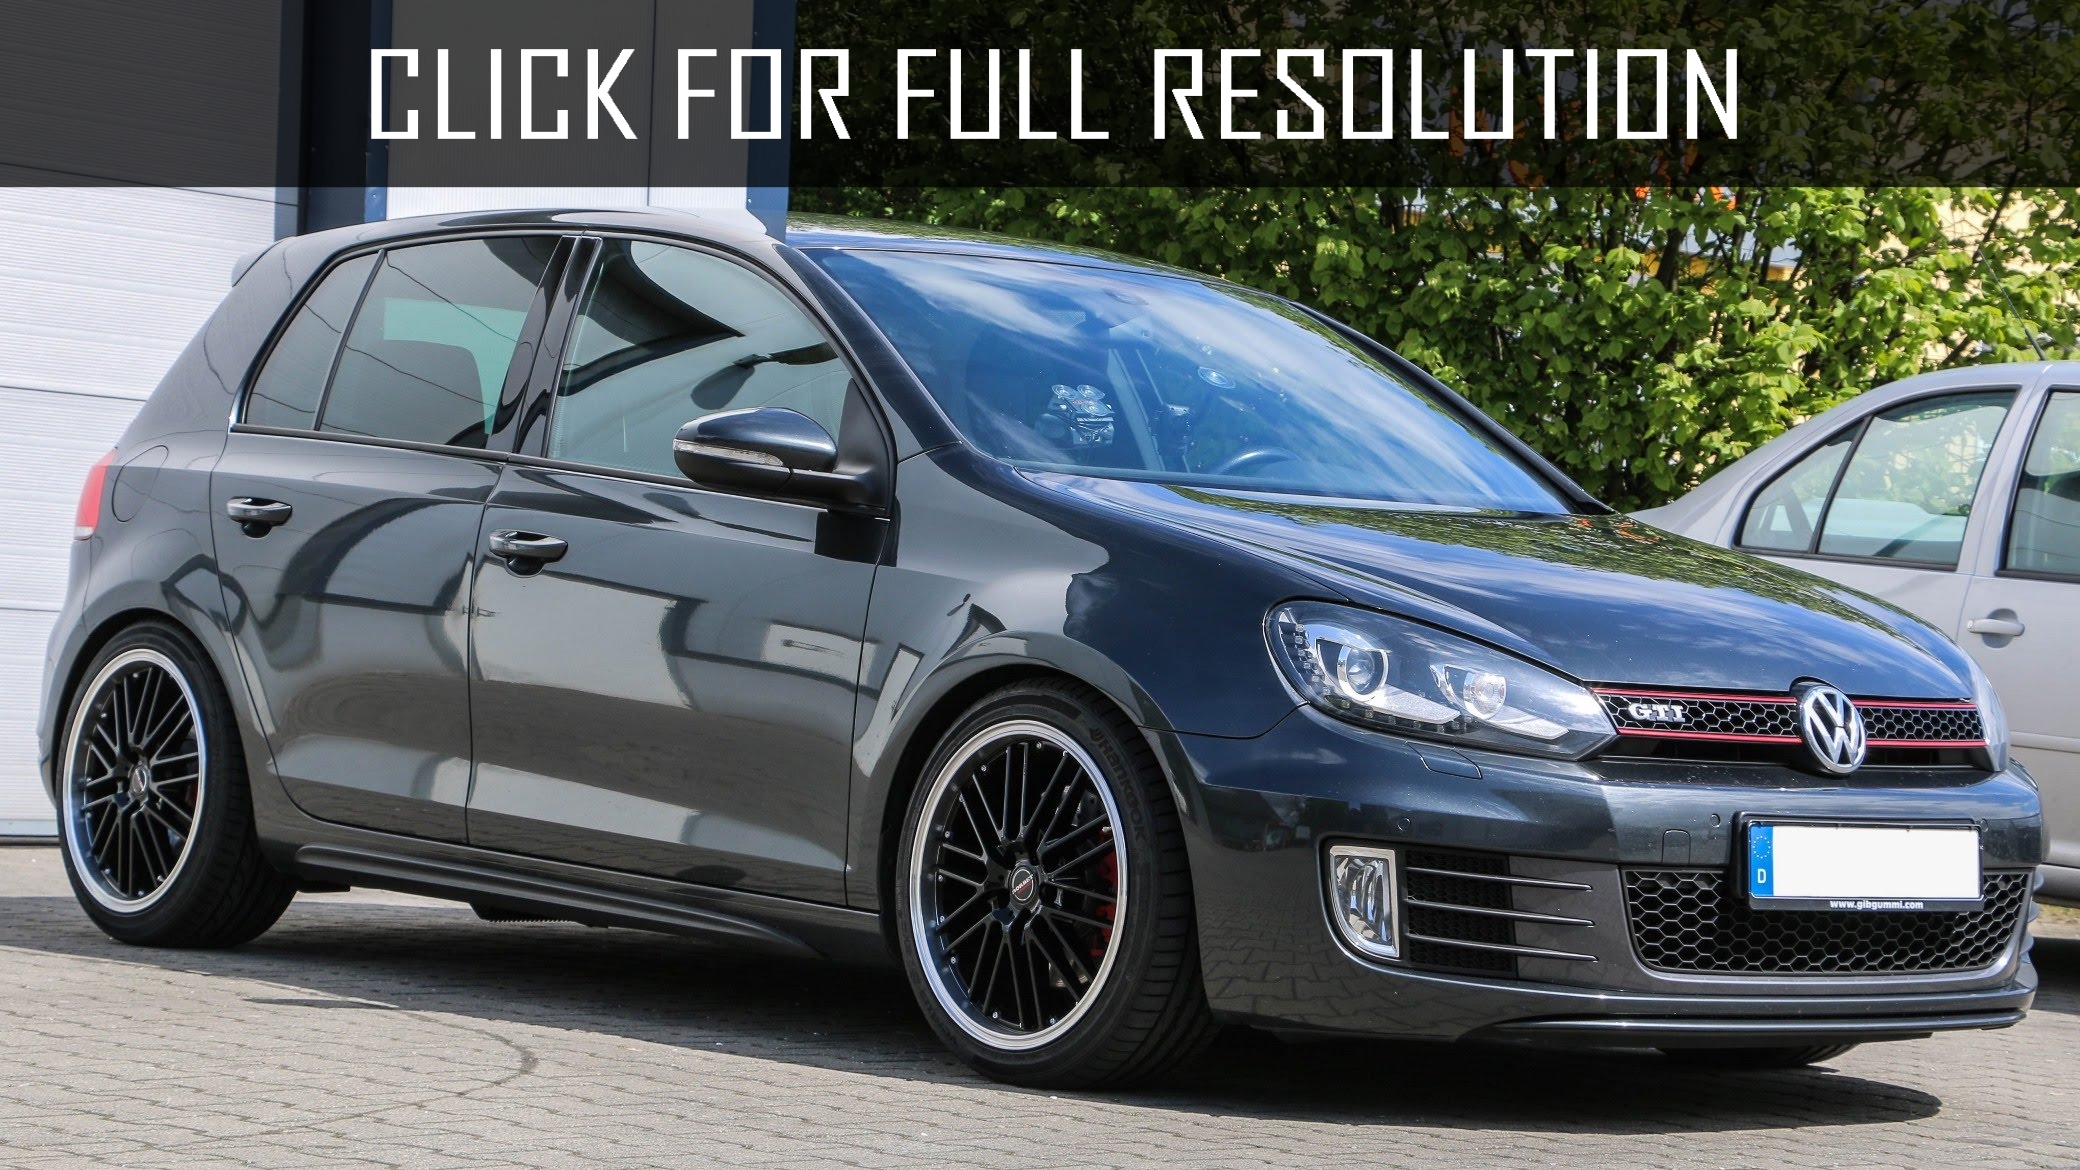 Volkswagen Golf 6 Gti - amazing photo gallery, some information and ...